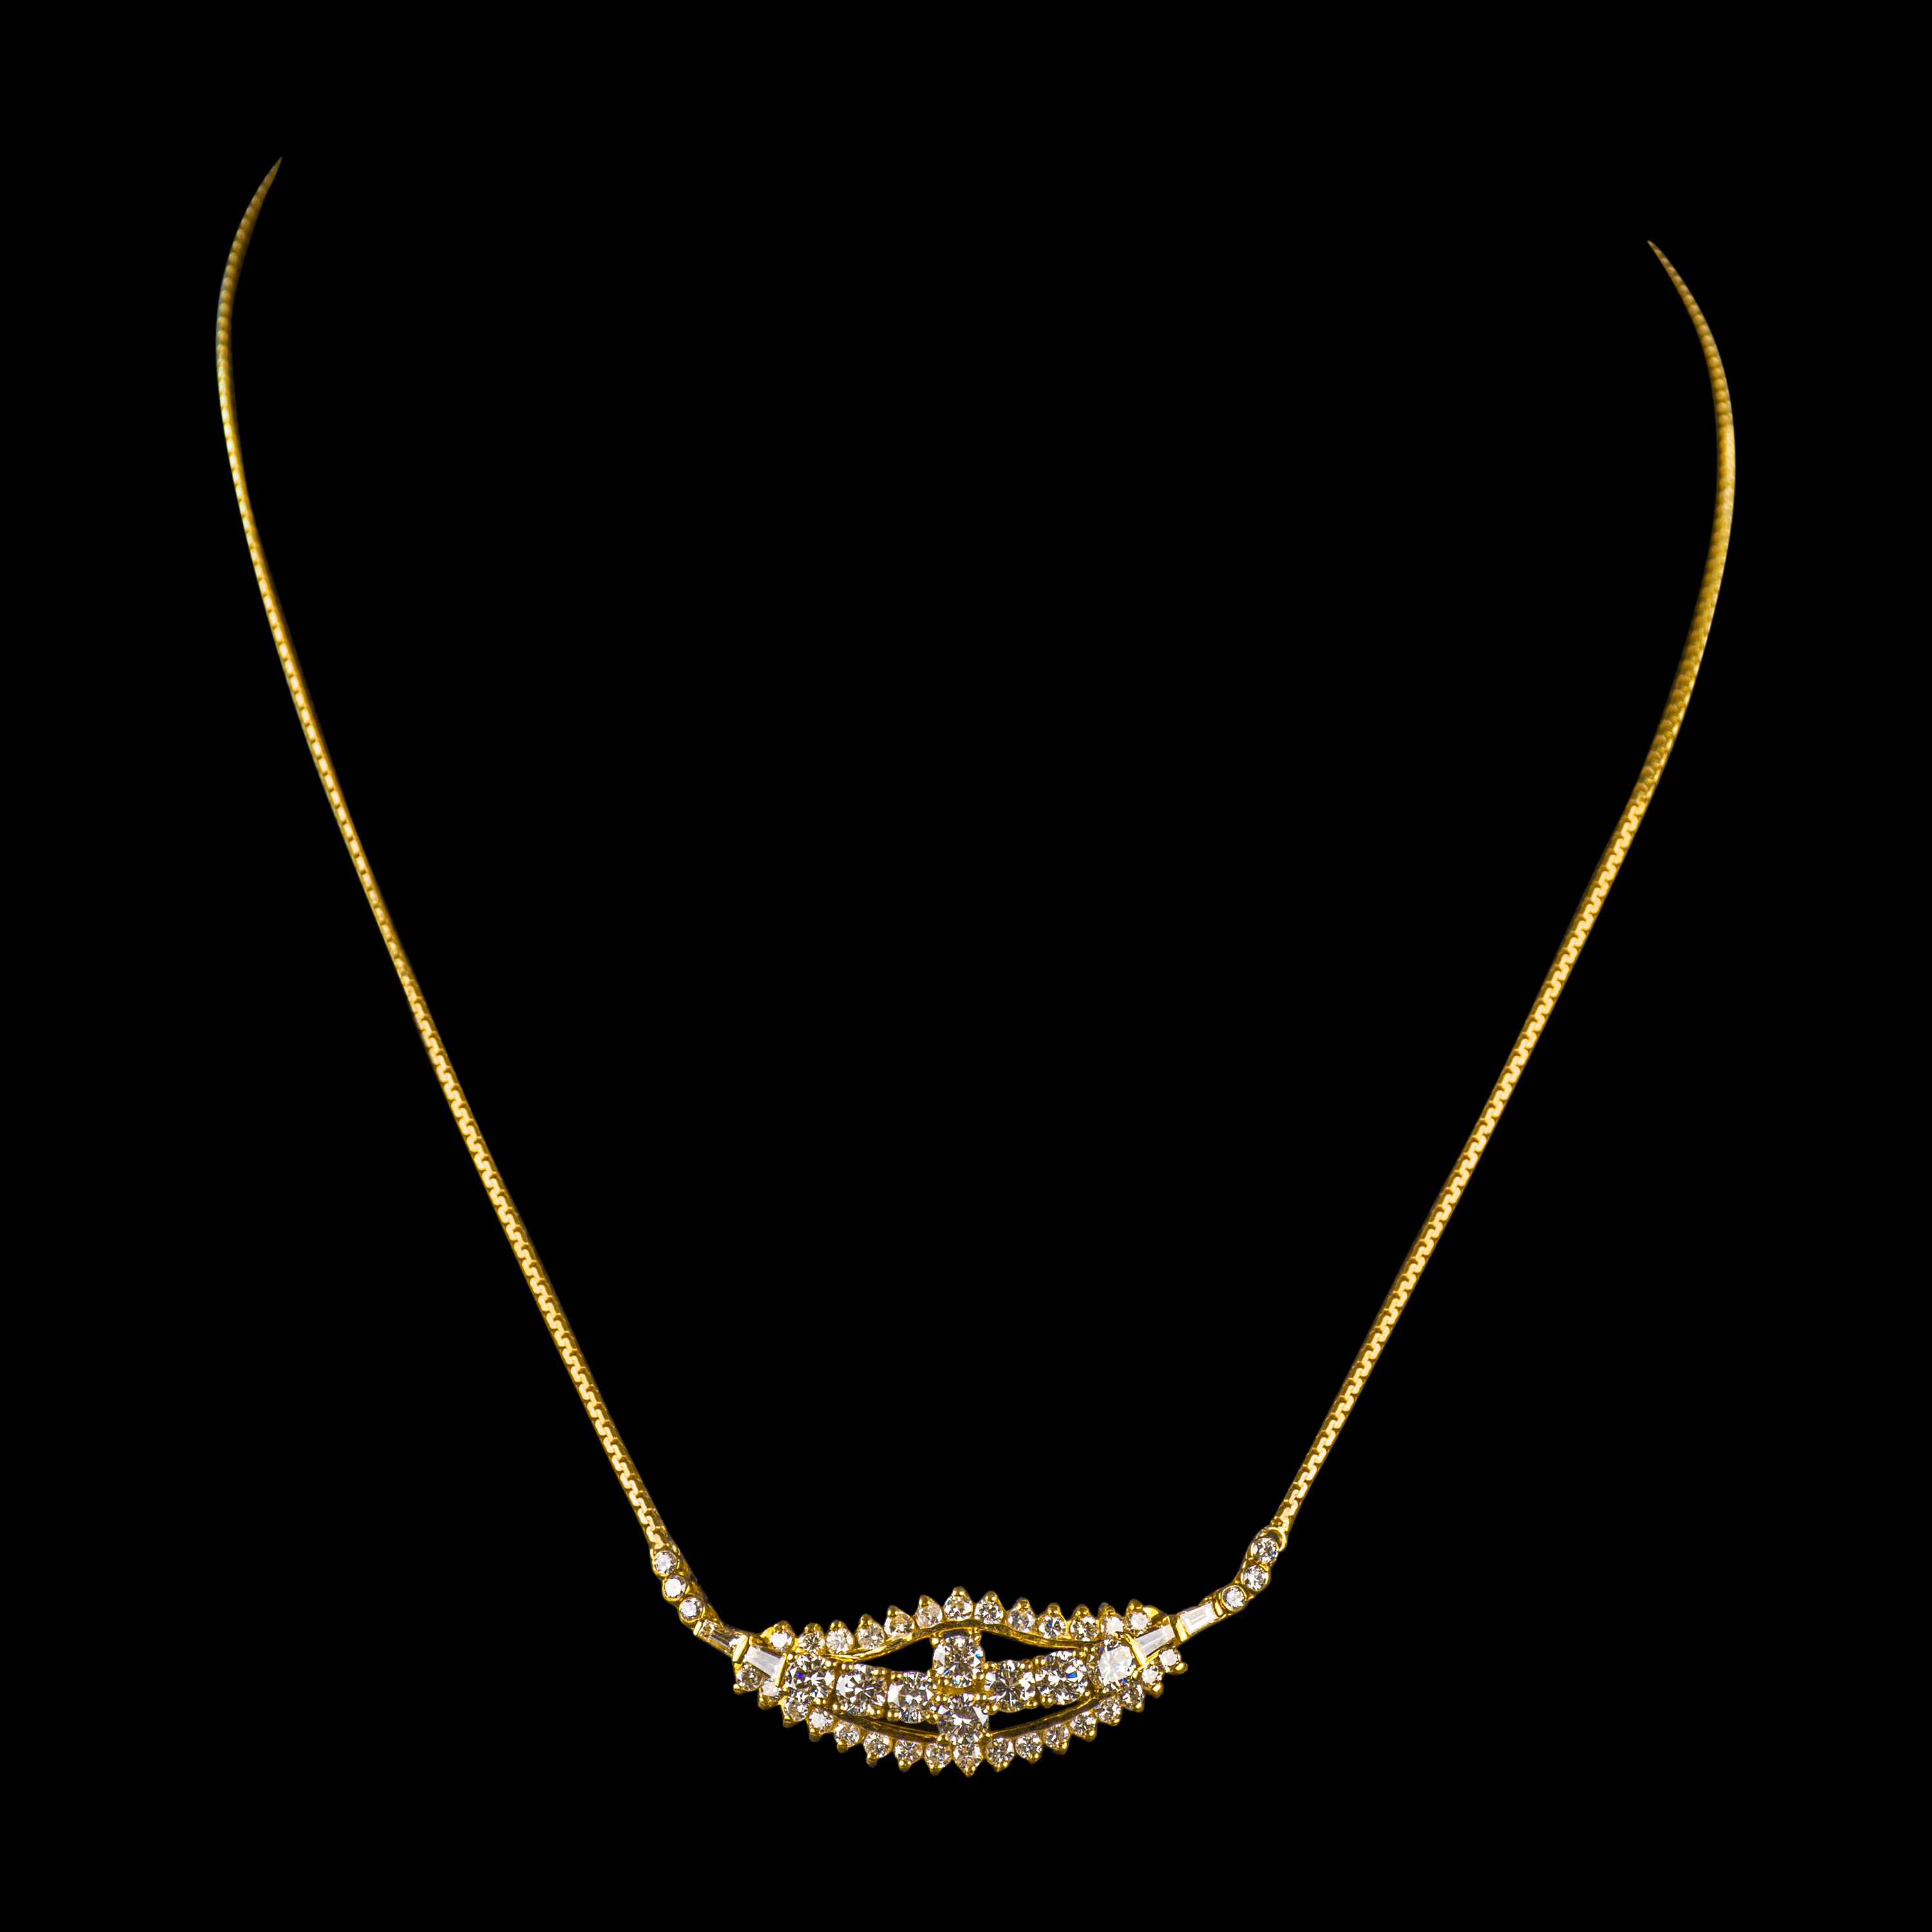 - An approximately 1.66 tcw diamond necklace set in 14k yellow gold